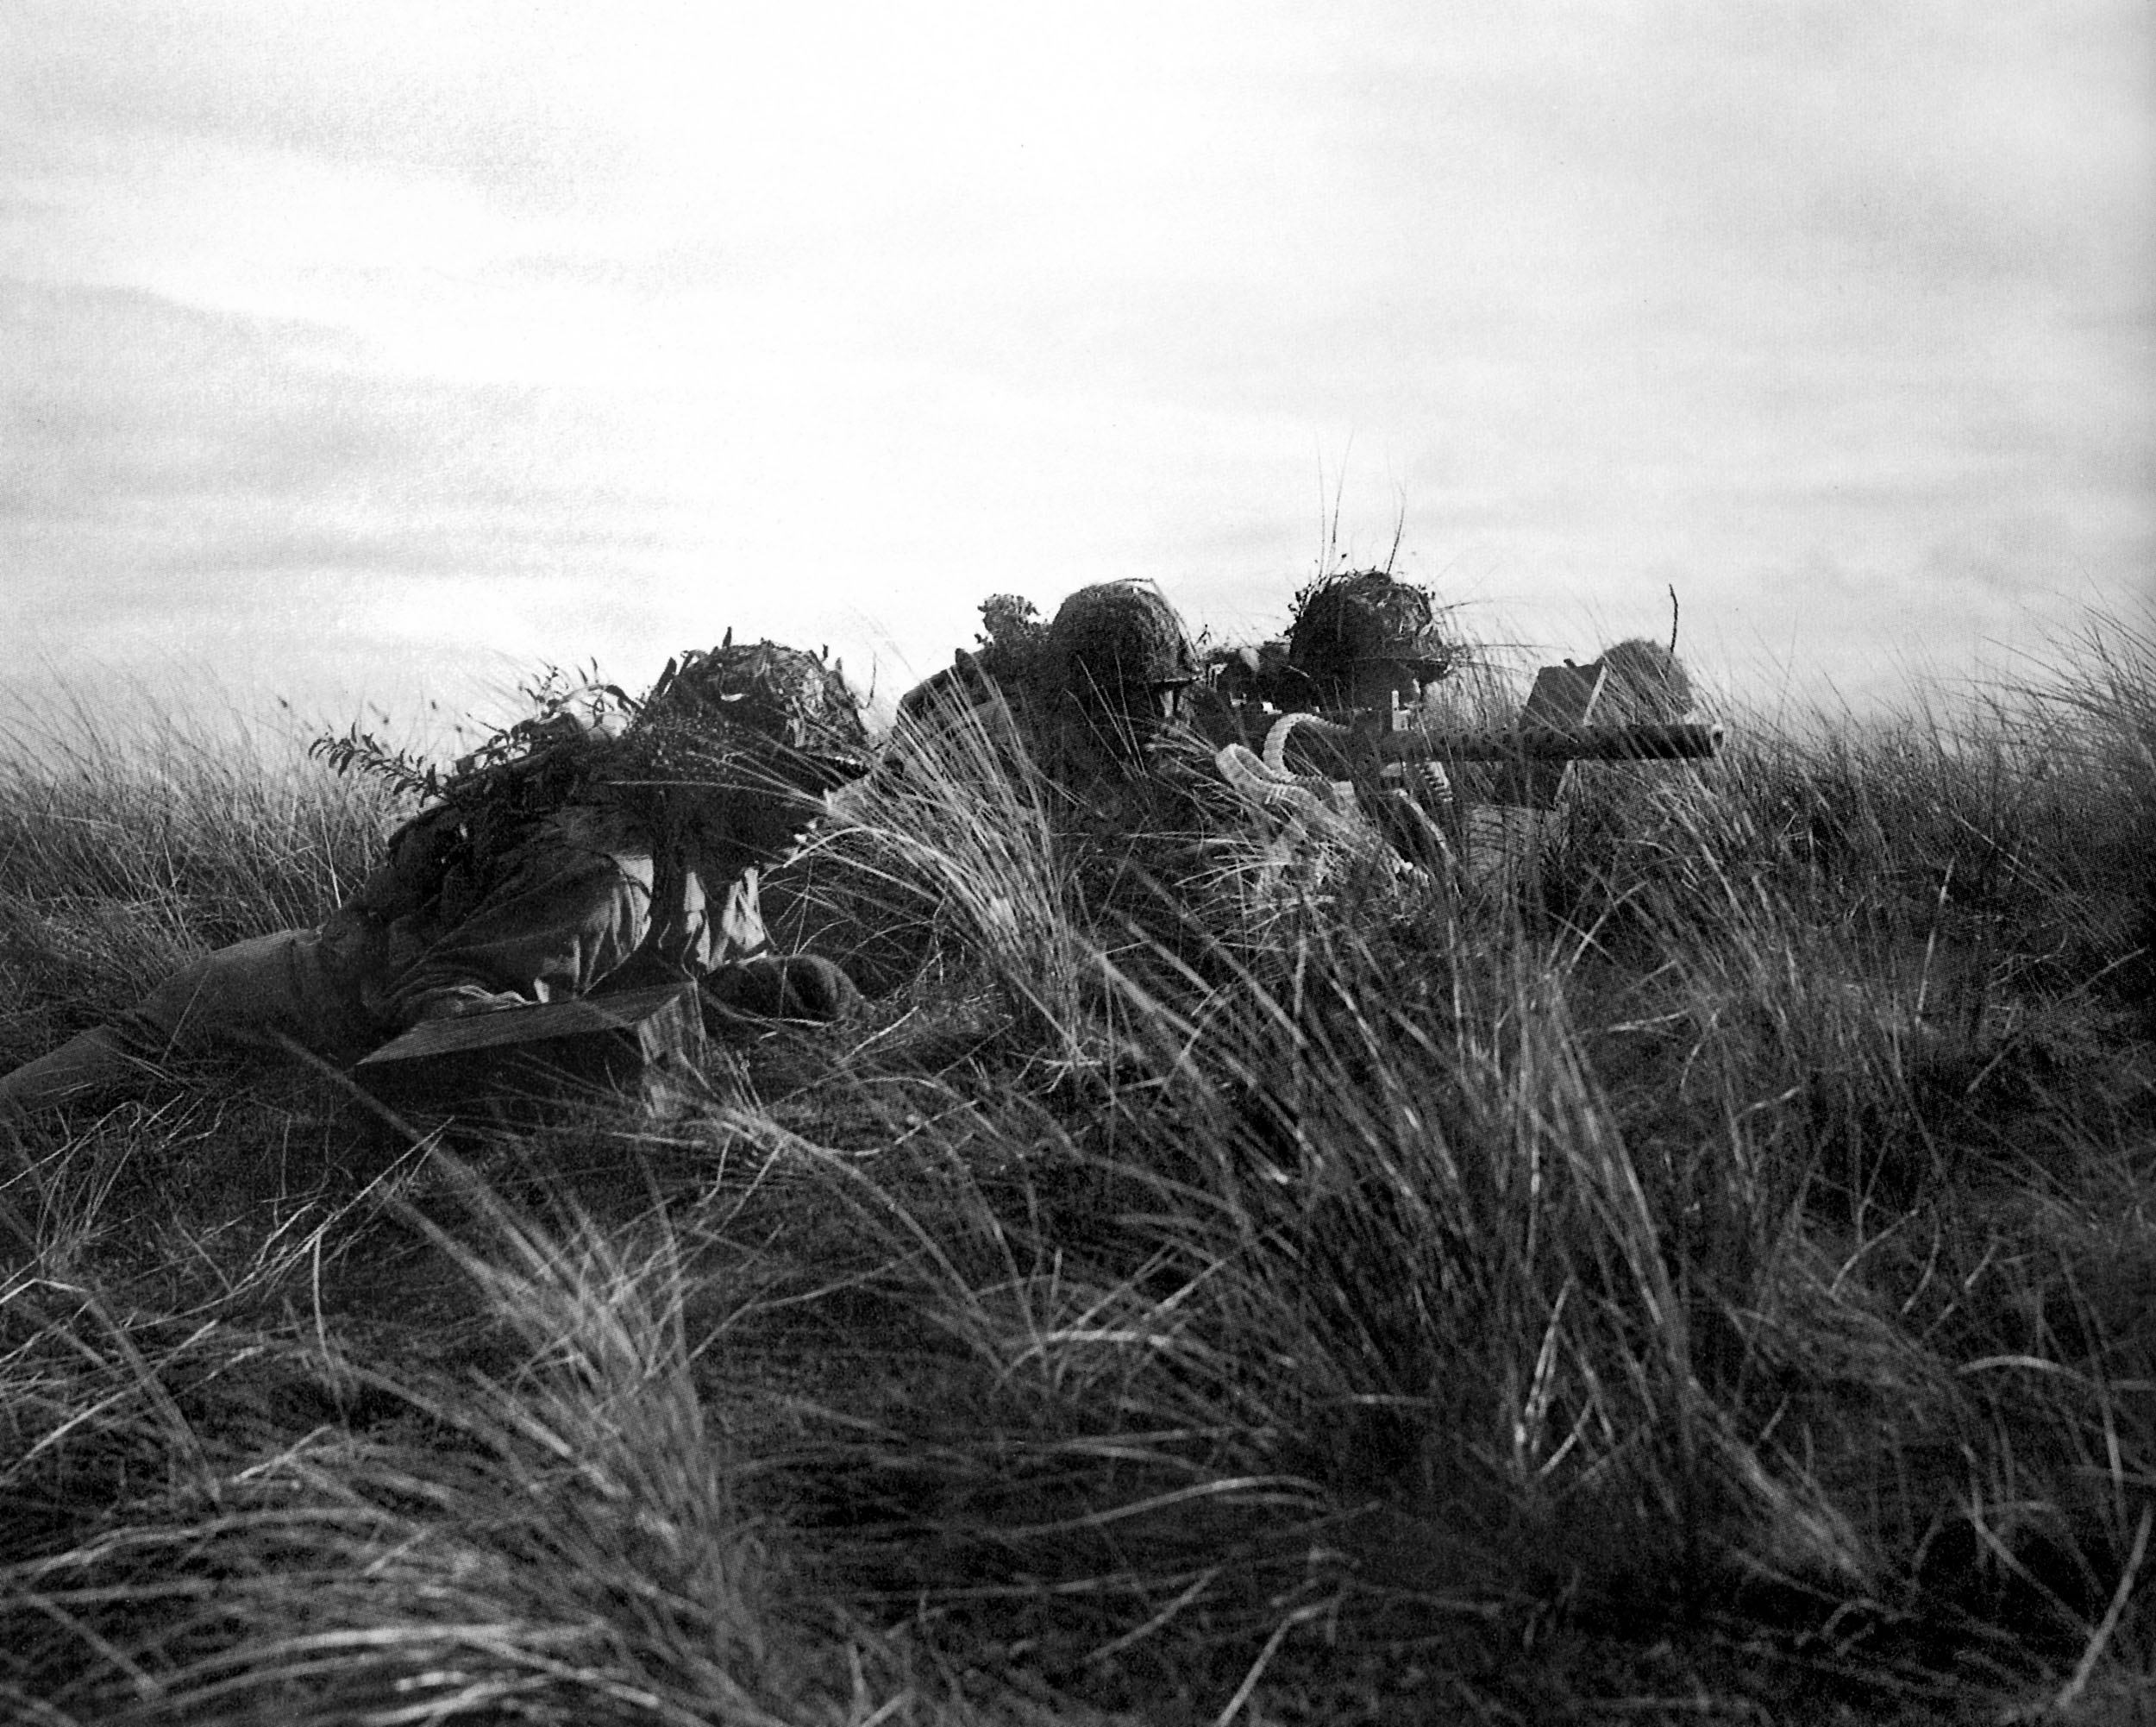 Three soldiers crouched in the sand